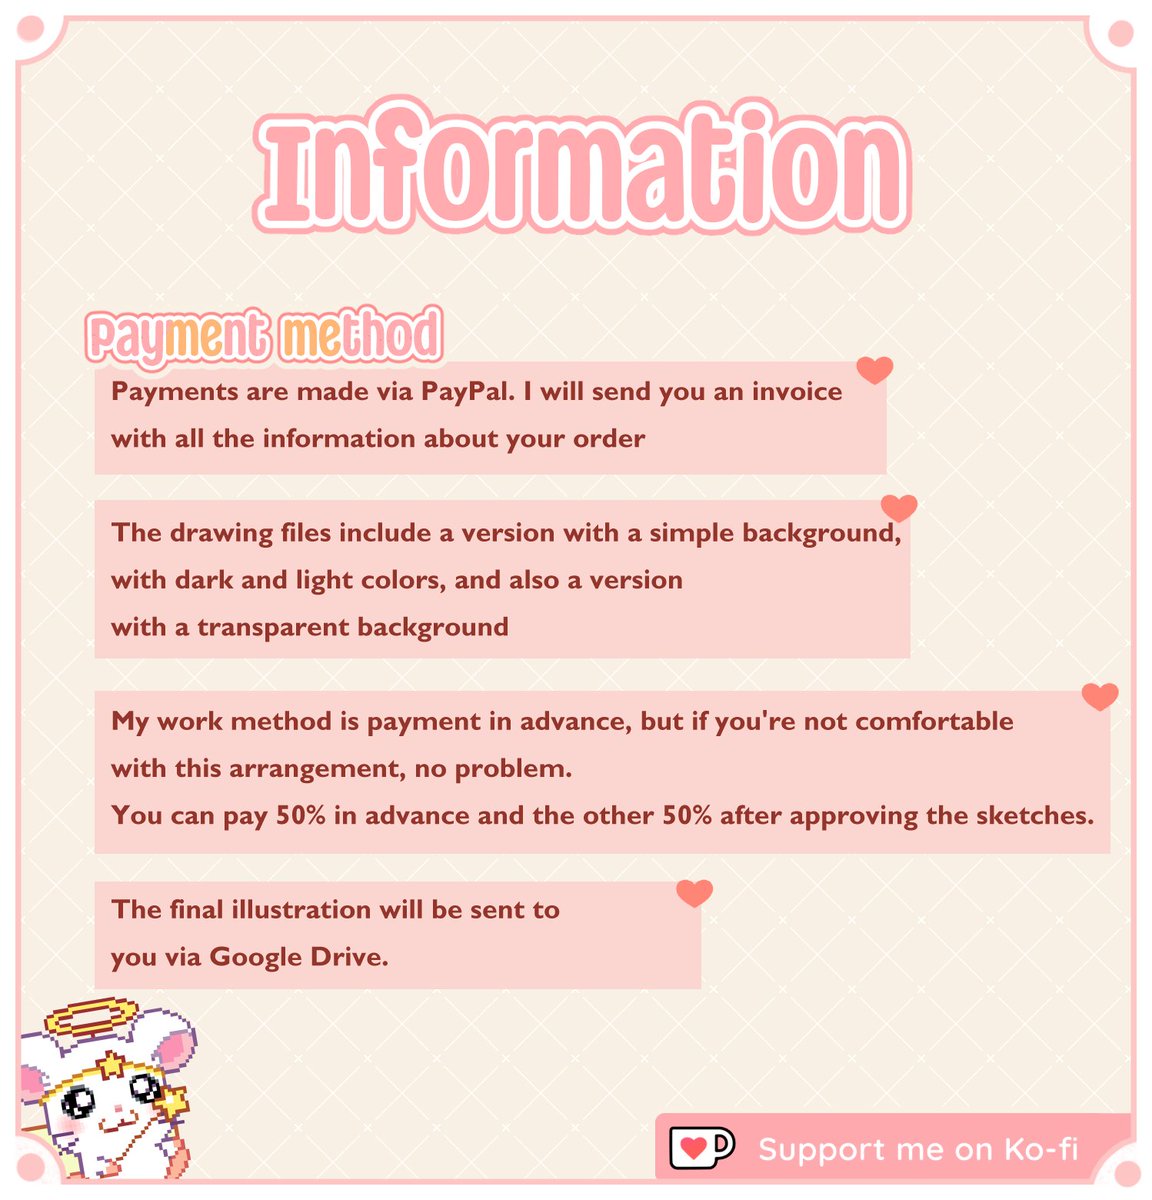 Exciting news! I'm opening up commissions for adorable chibi-style artwork for a limited time. And to make it even sweeter, you can add your beloved pet to your order at no extra cost. Take advantage of this paw-some opportunity! 

#chibi #commission #illustration